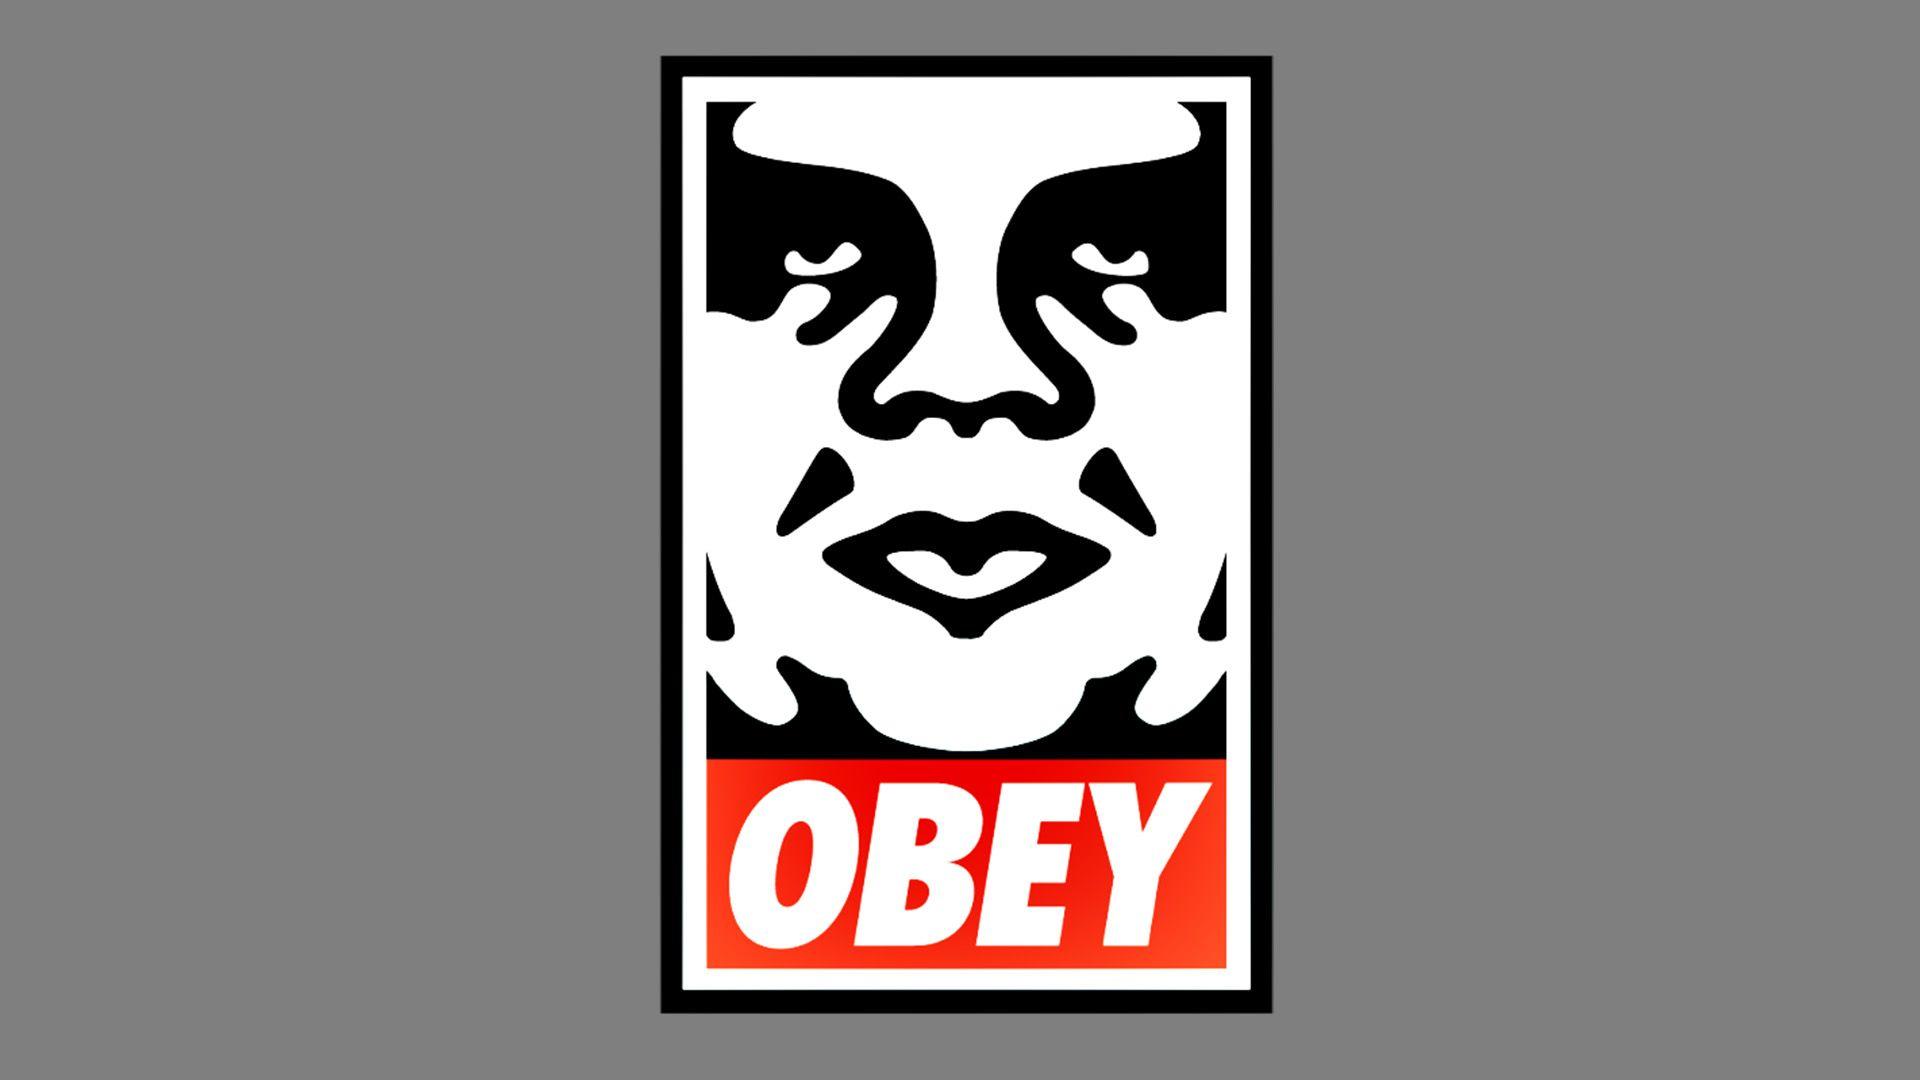 Obey Star Logo - Obey Logo, Obey Symbol, Meaning, History and Evolution